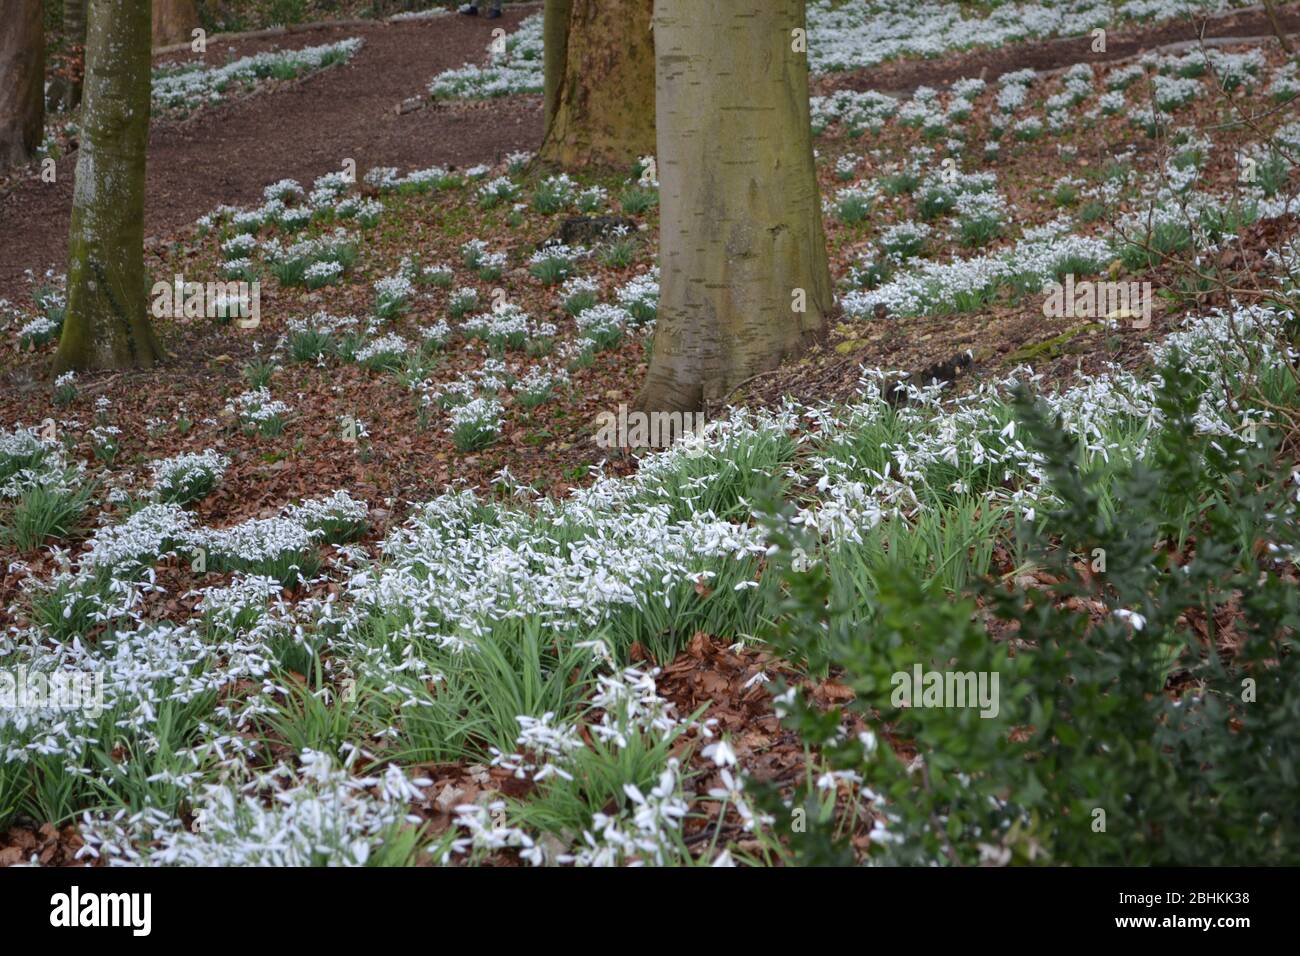 Snowdrops (Galanthus) on a forest floor: bright white little flowers on green leaves at low level in a woodland in winter, surrounded by dead autumn l Stock Photo